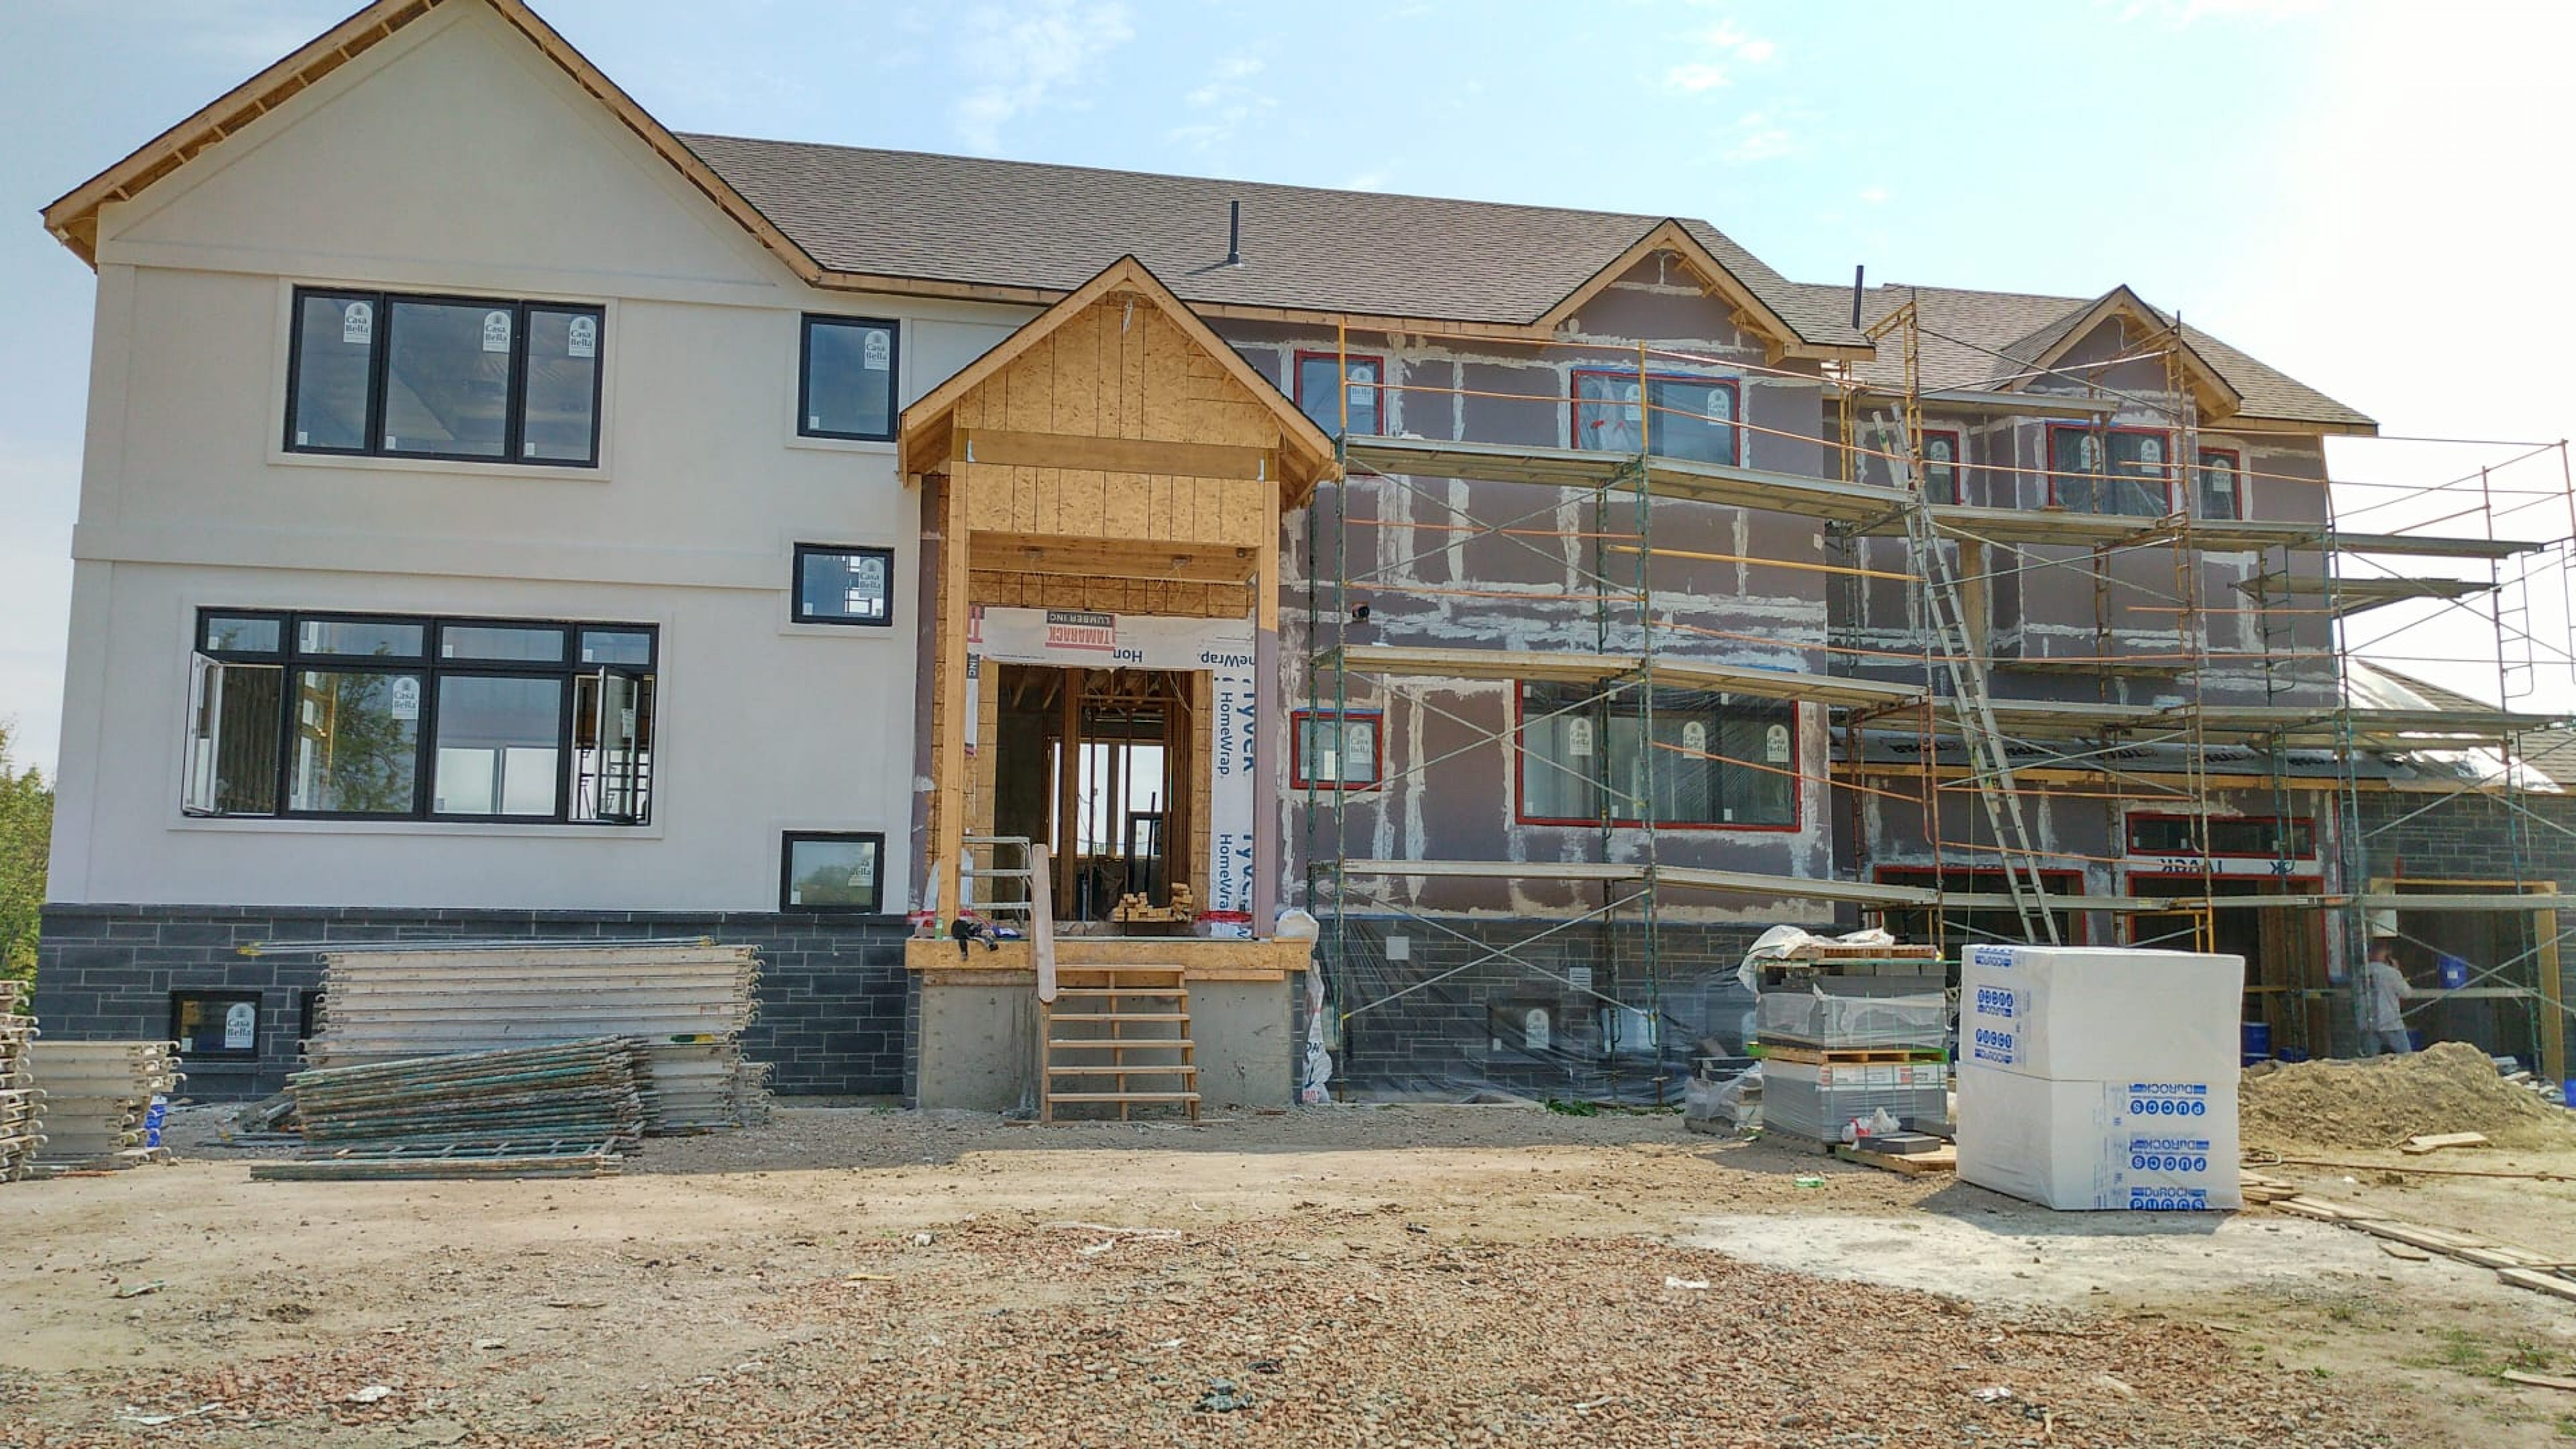 Sky Stucco Systems Ontario The process of An Exterior Stucco Home overview From Scratch: Moisture Proof Stage